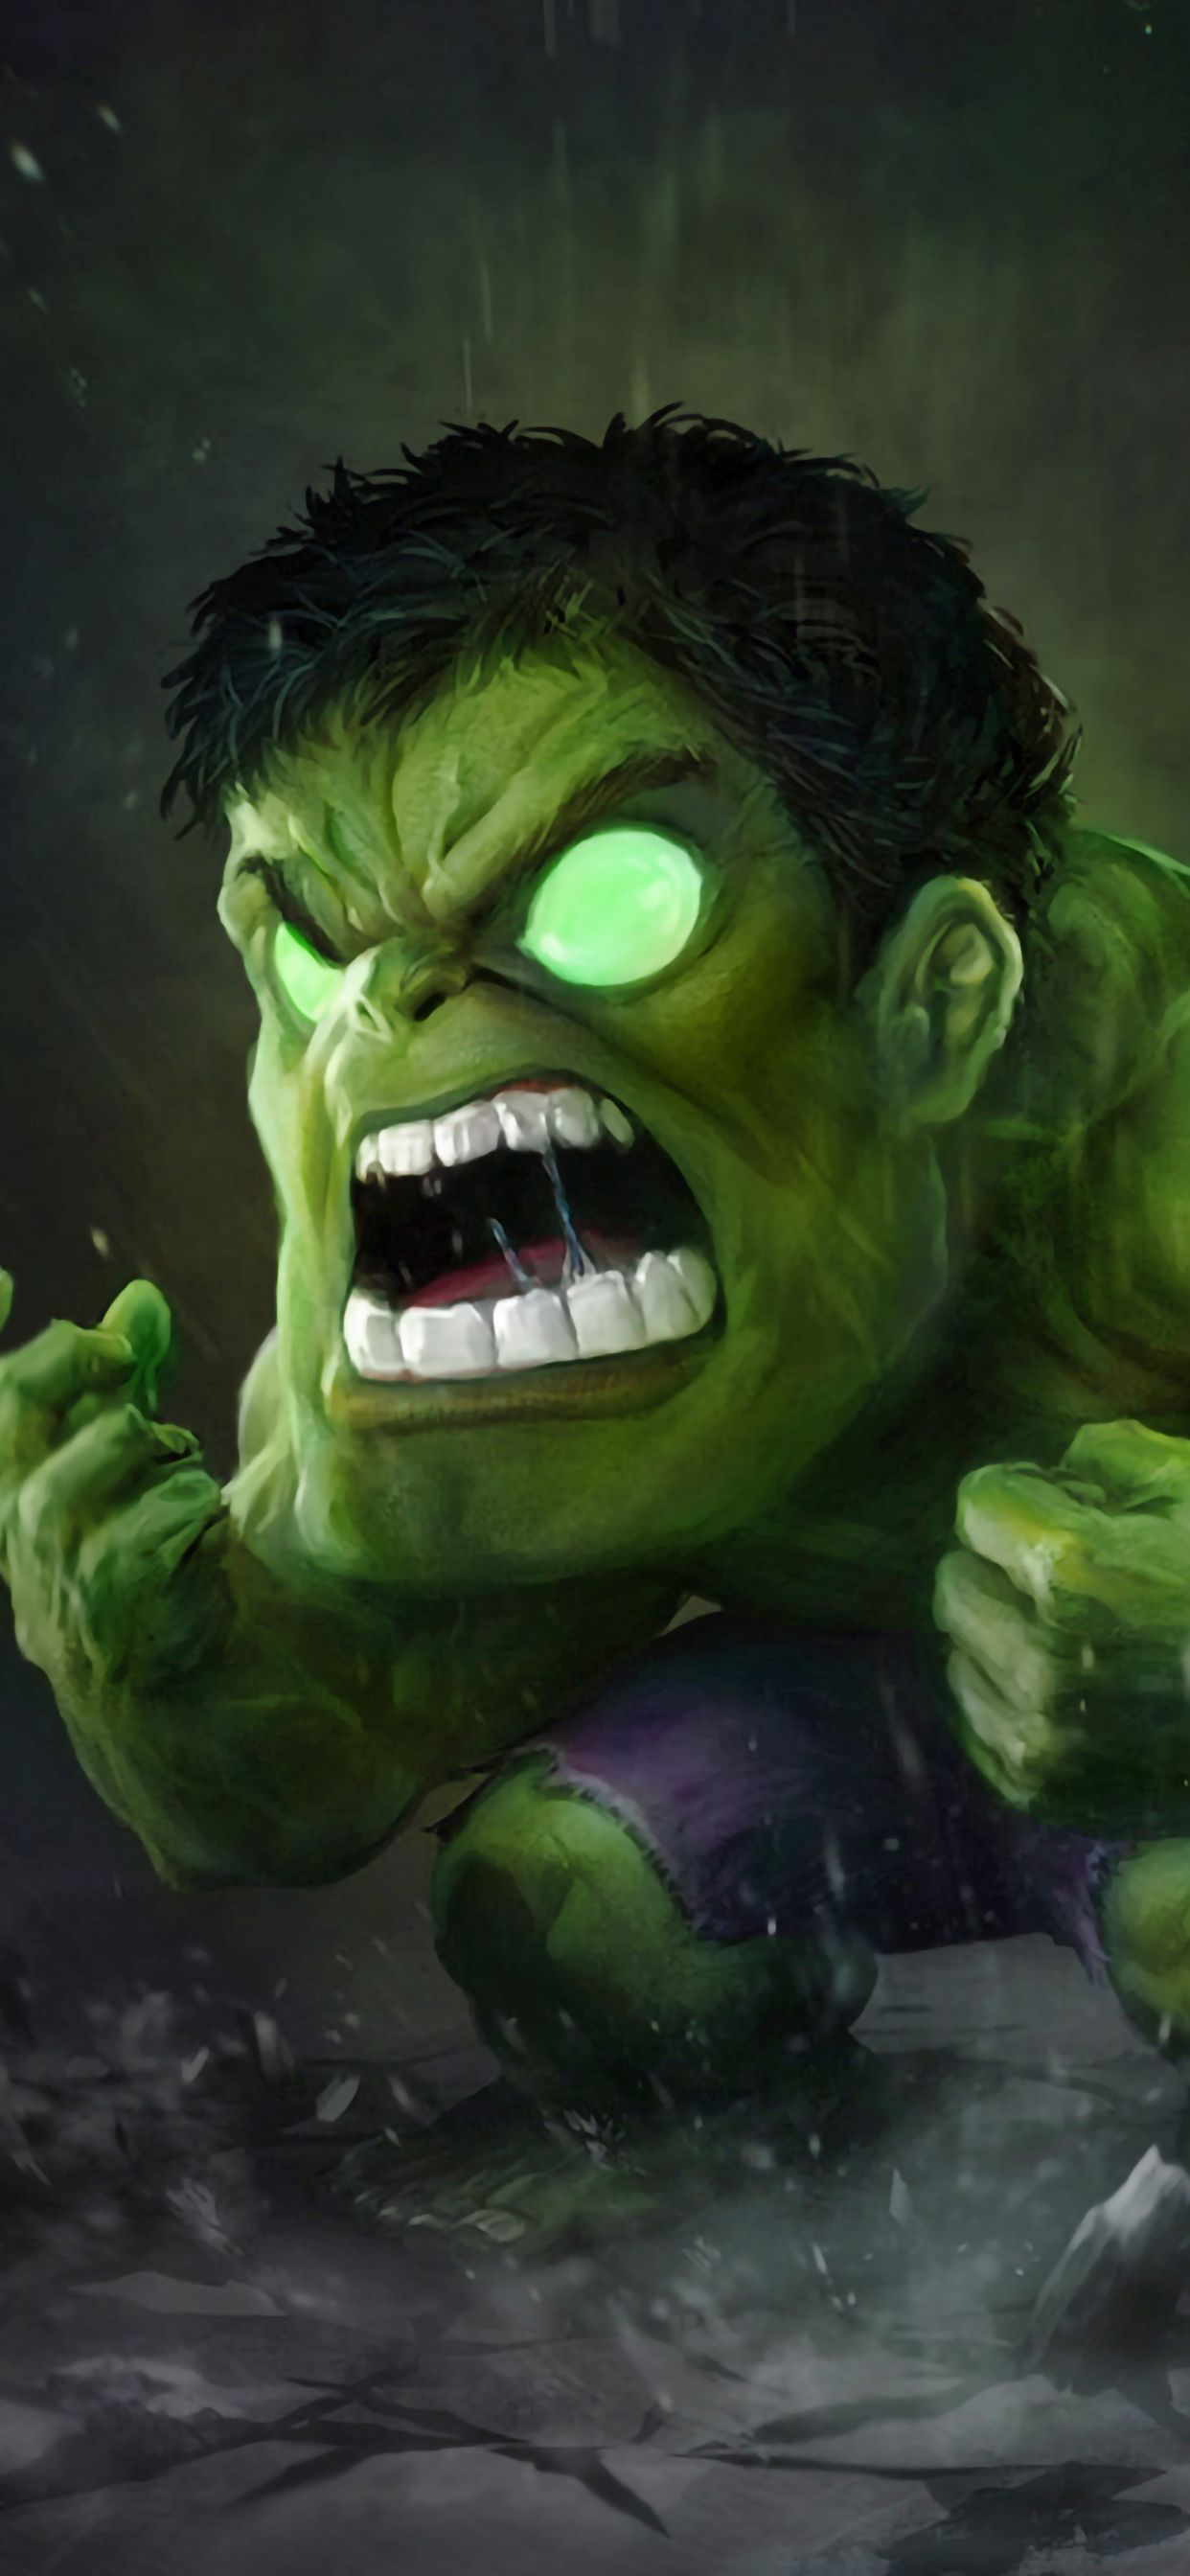 Small Angry Hulk iPhone XS MAX Wallpaper, HD Superheroes 4K Wallpaper, Image, Photo and Background